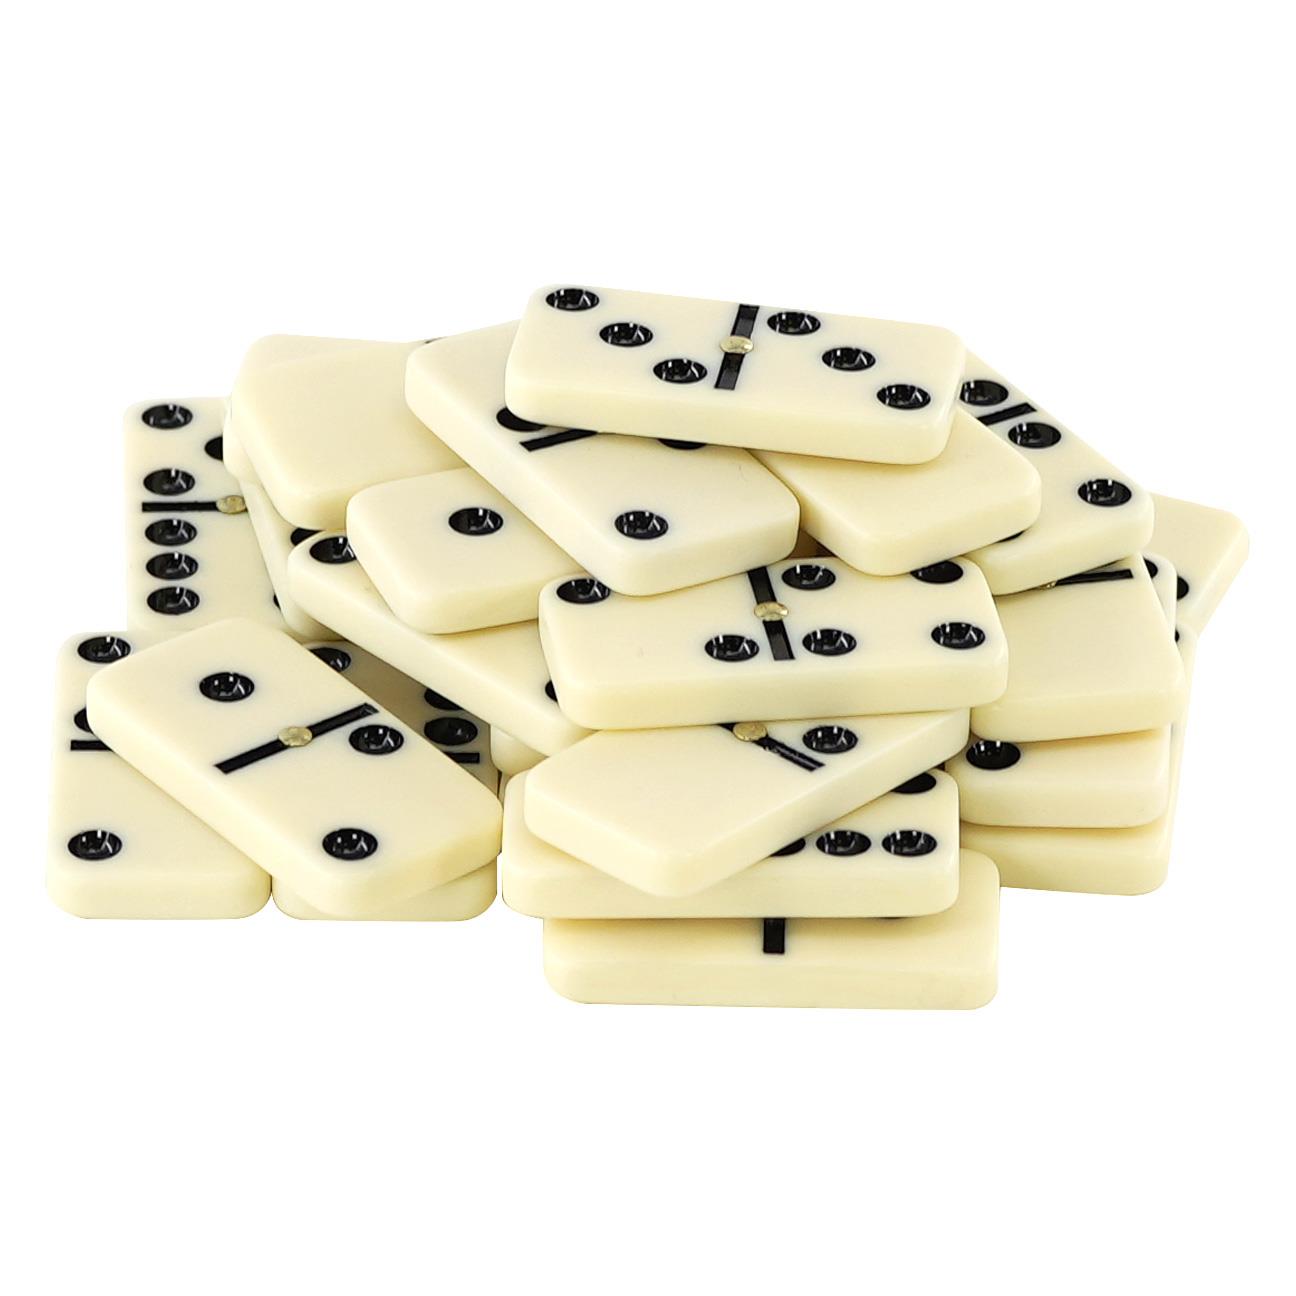 Double Six Classic Dominoes Set by MY - UKBuyZone